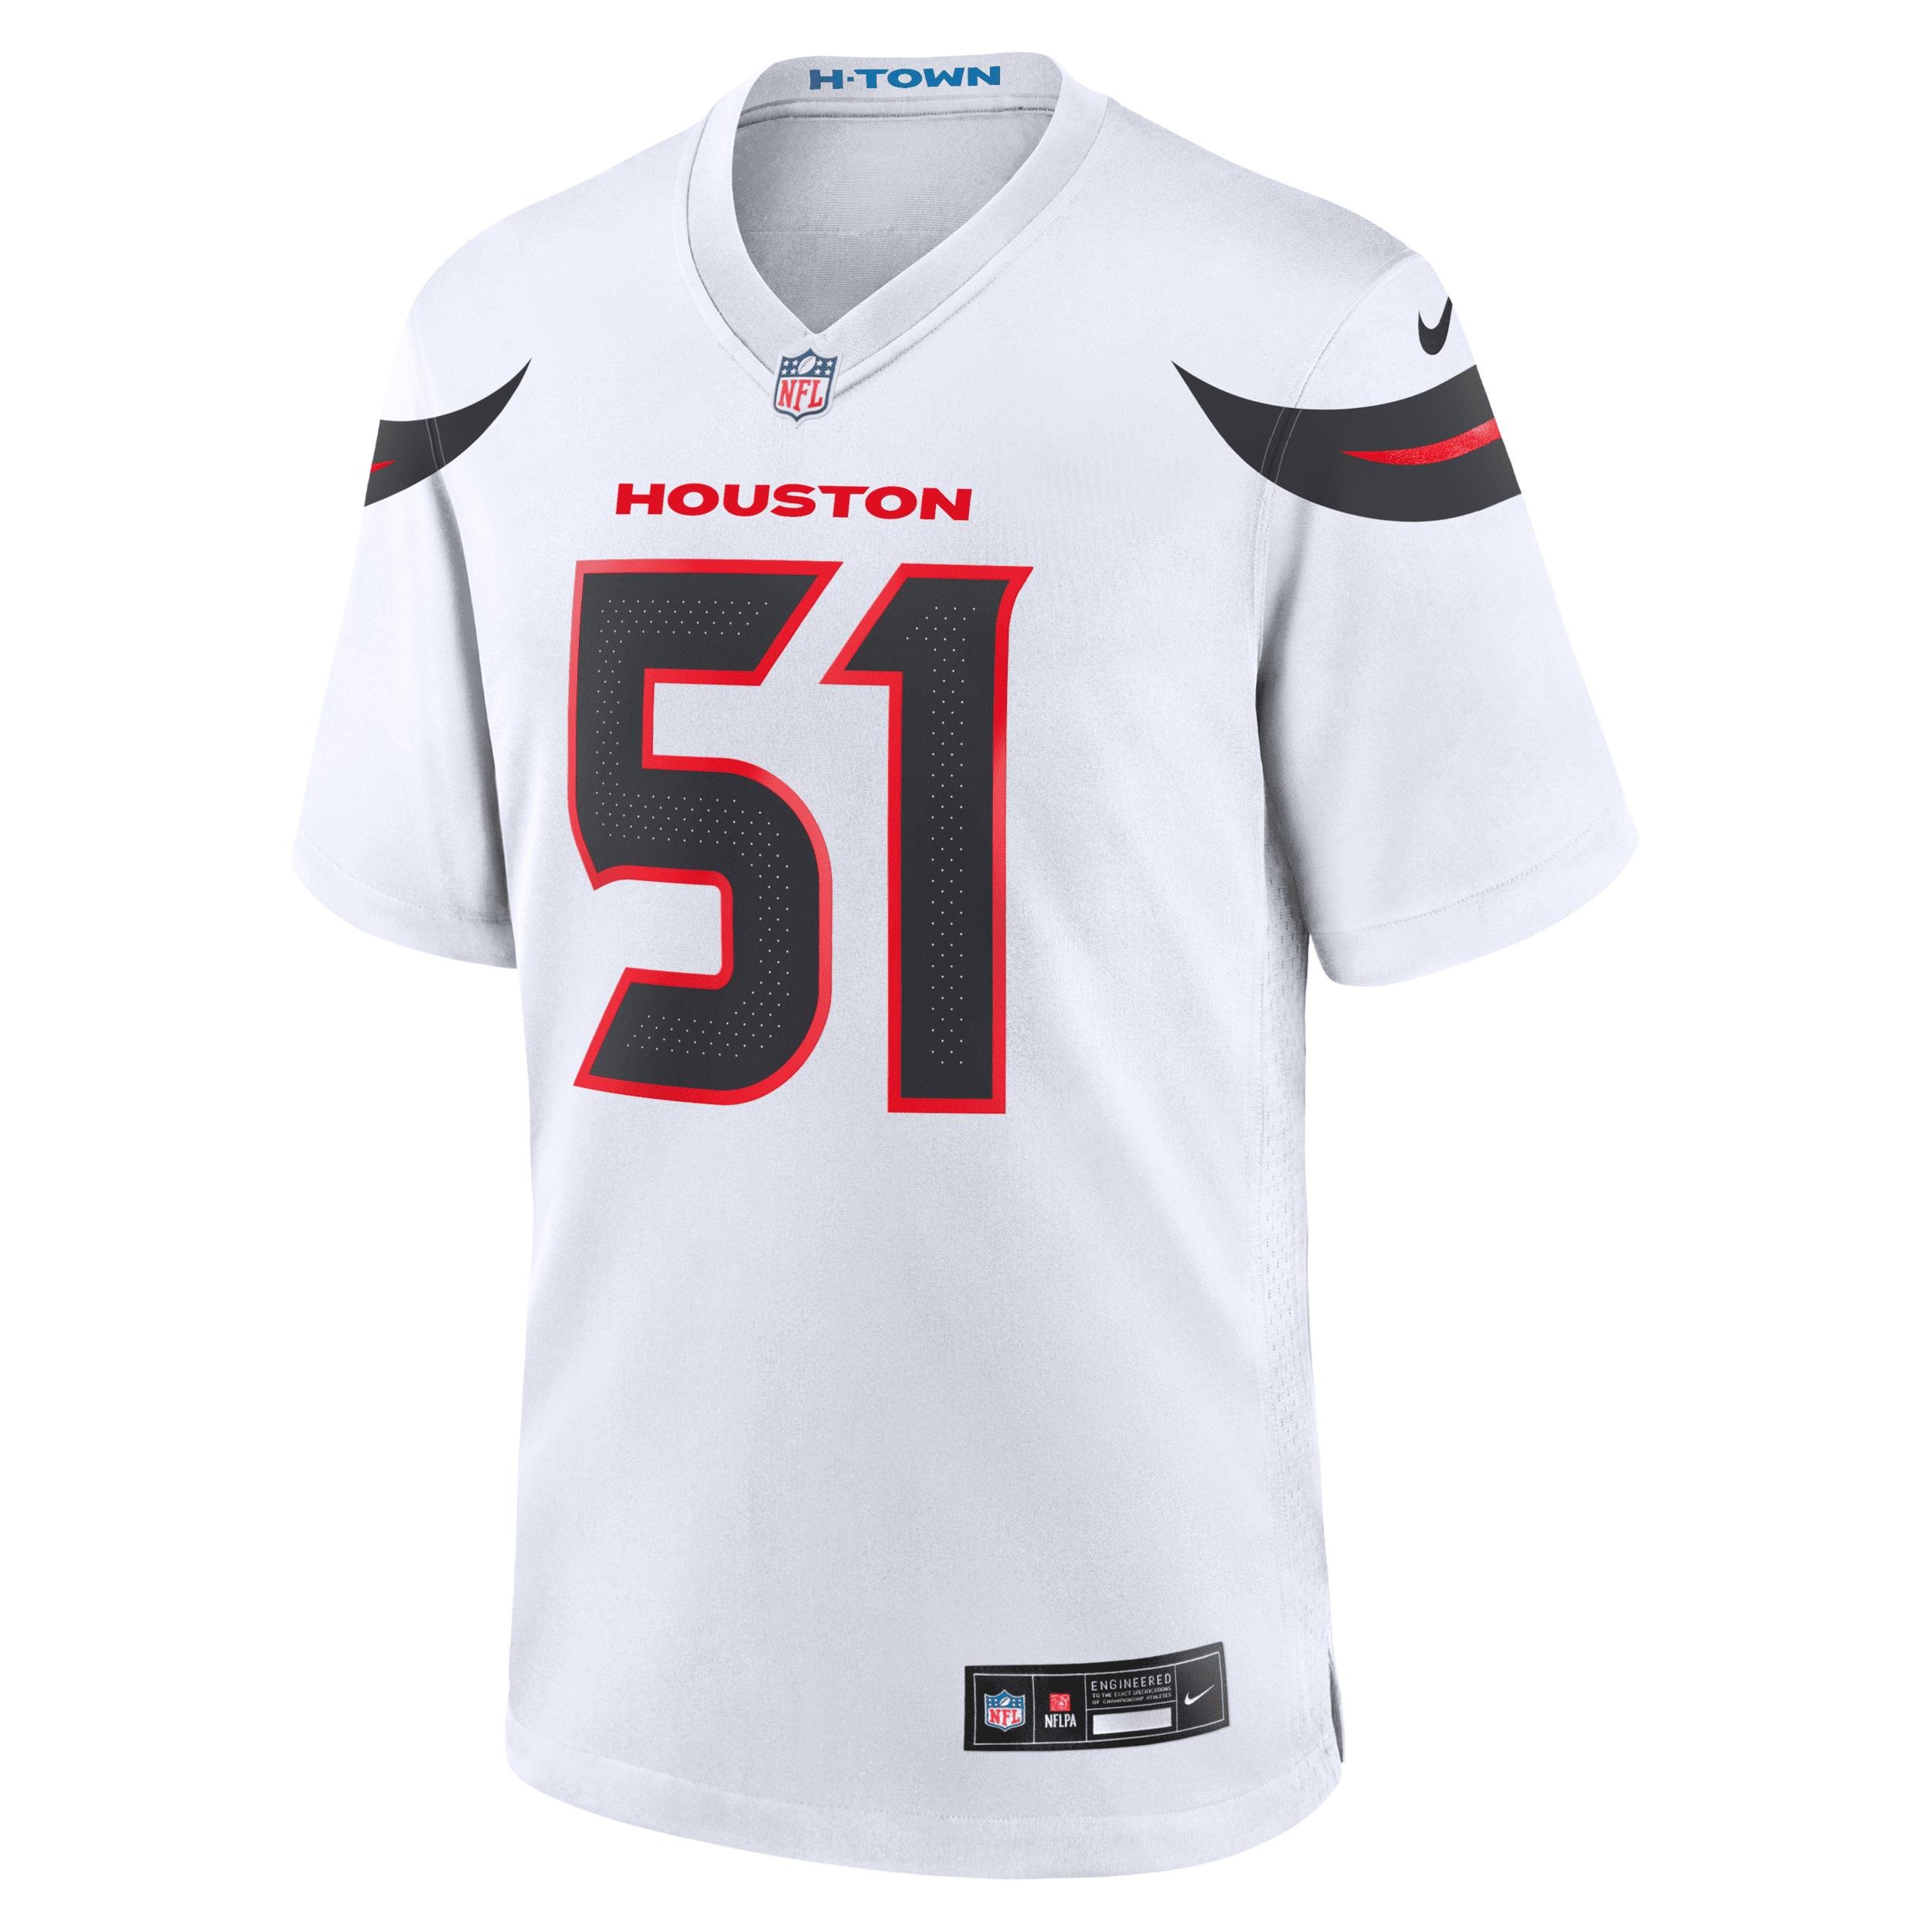 Will Anderson Jr. Houston Texans Nike Men's NFL Game Football Jersey by NIKE